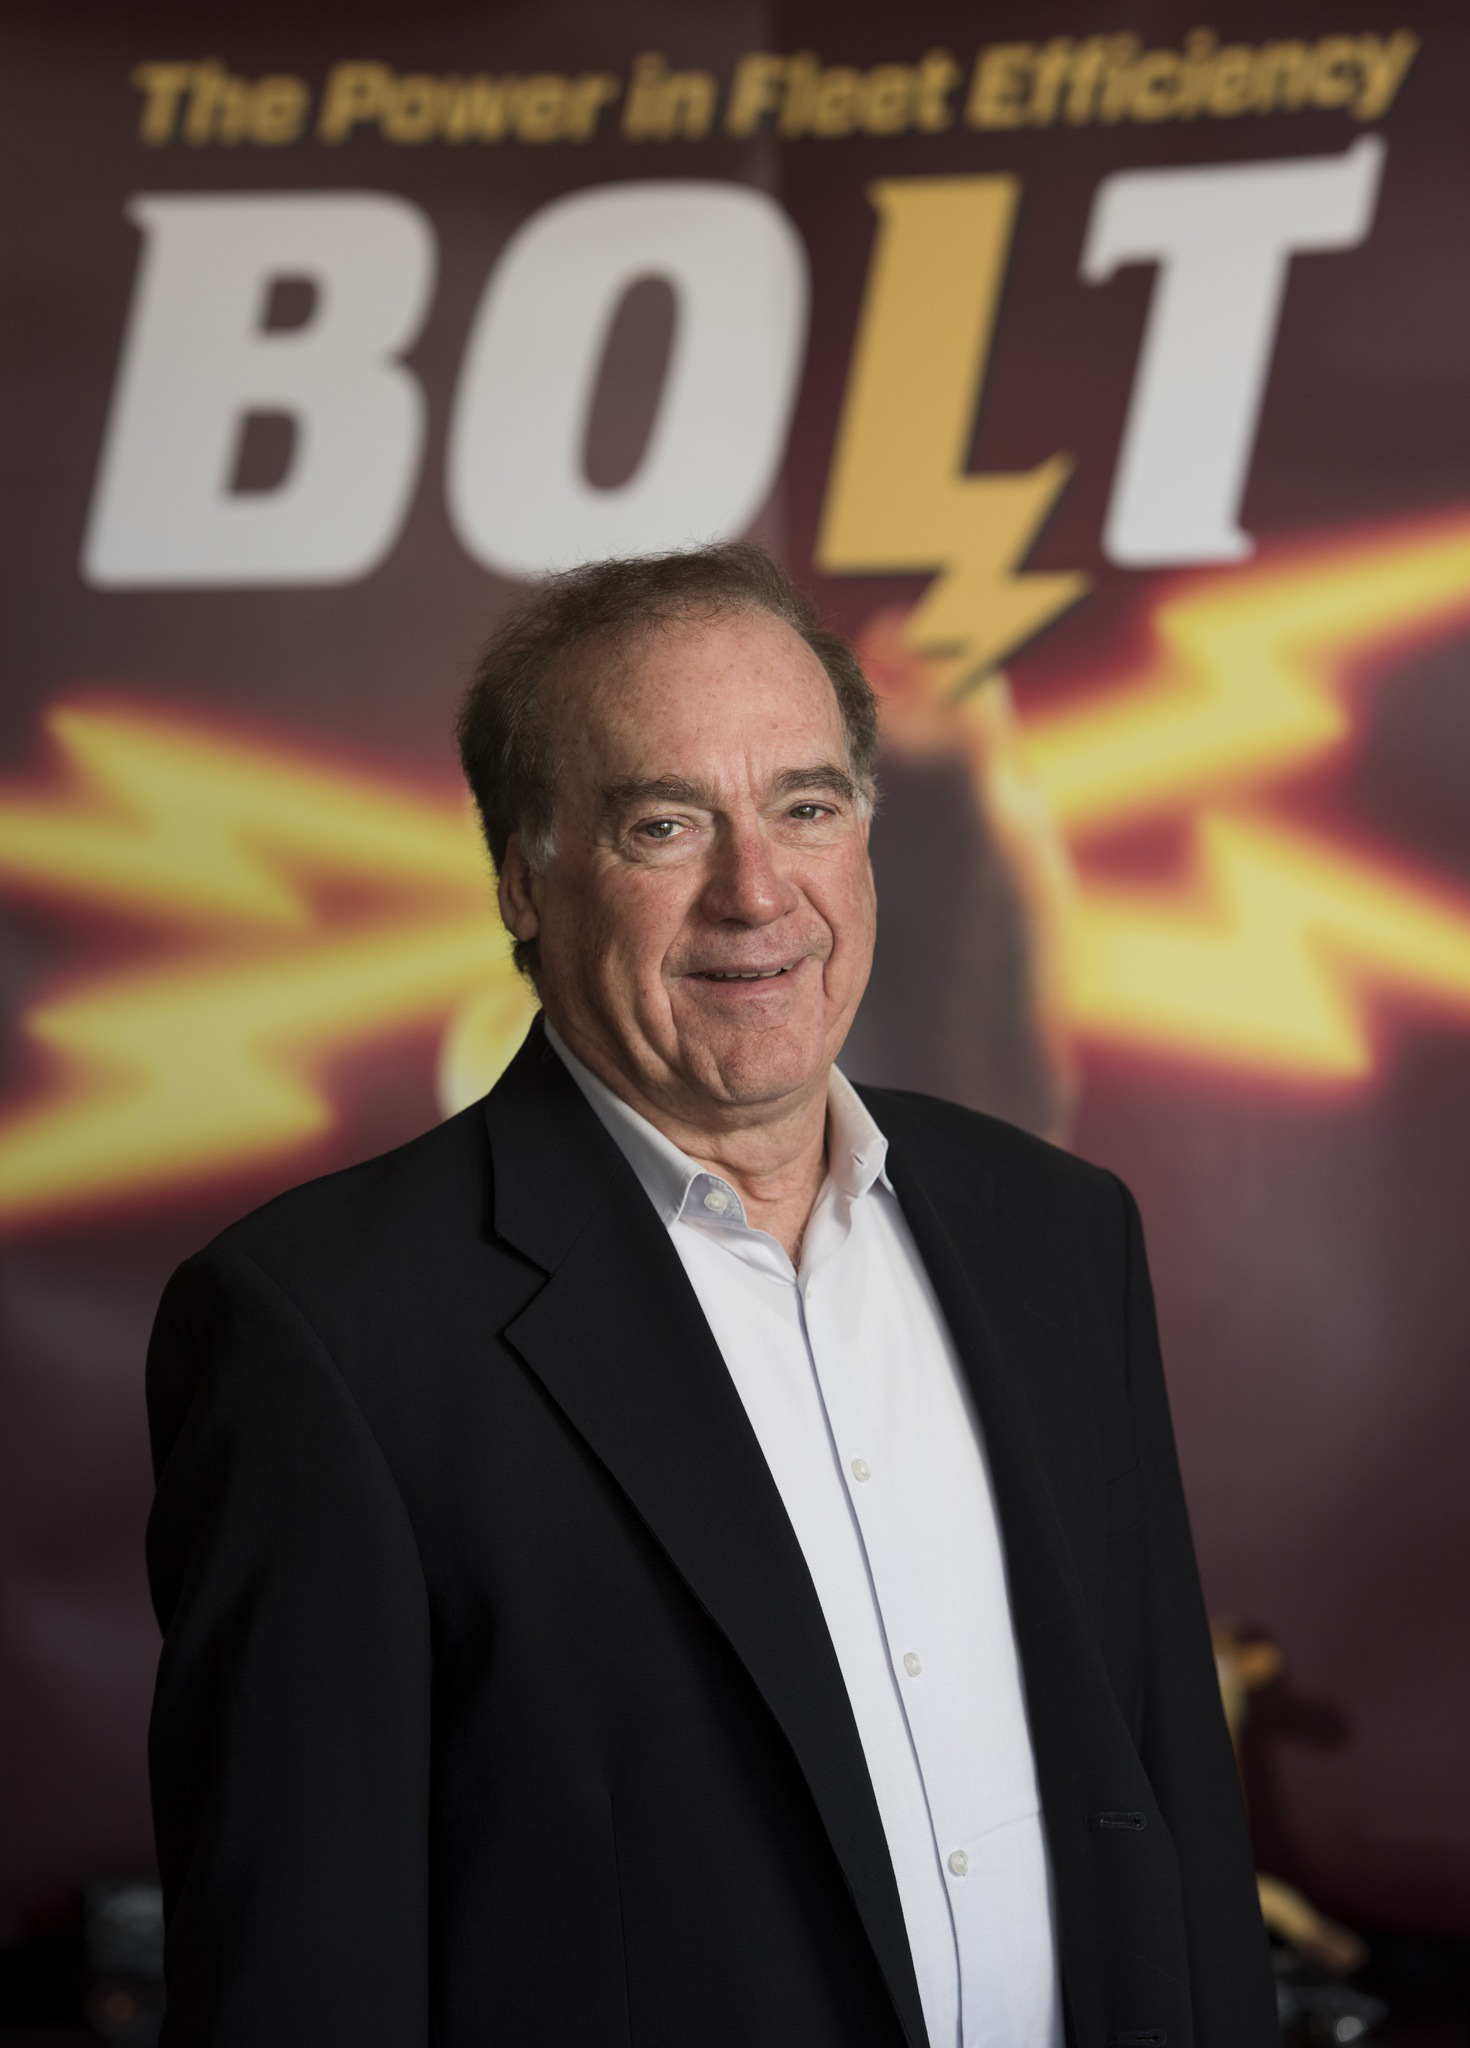 Chief Technology Officer of BOLT Software